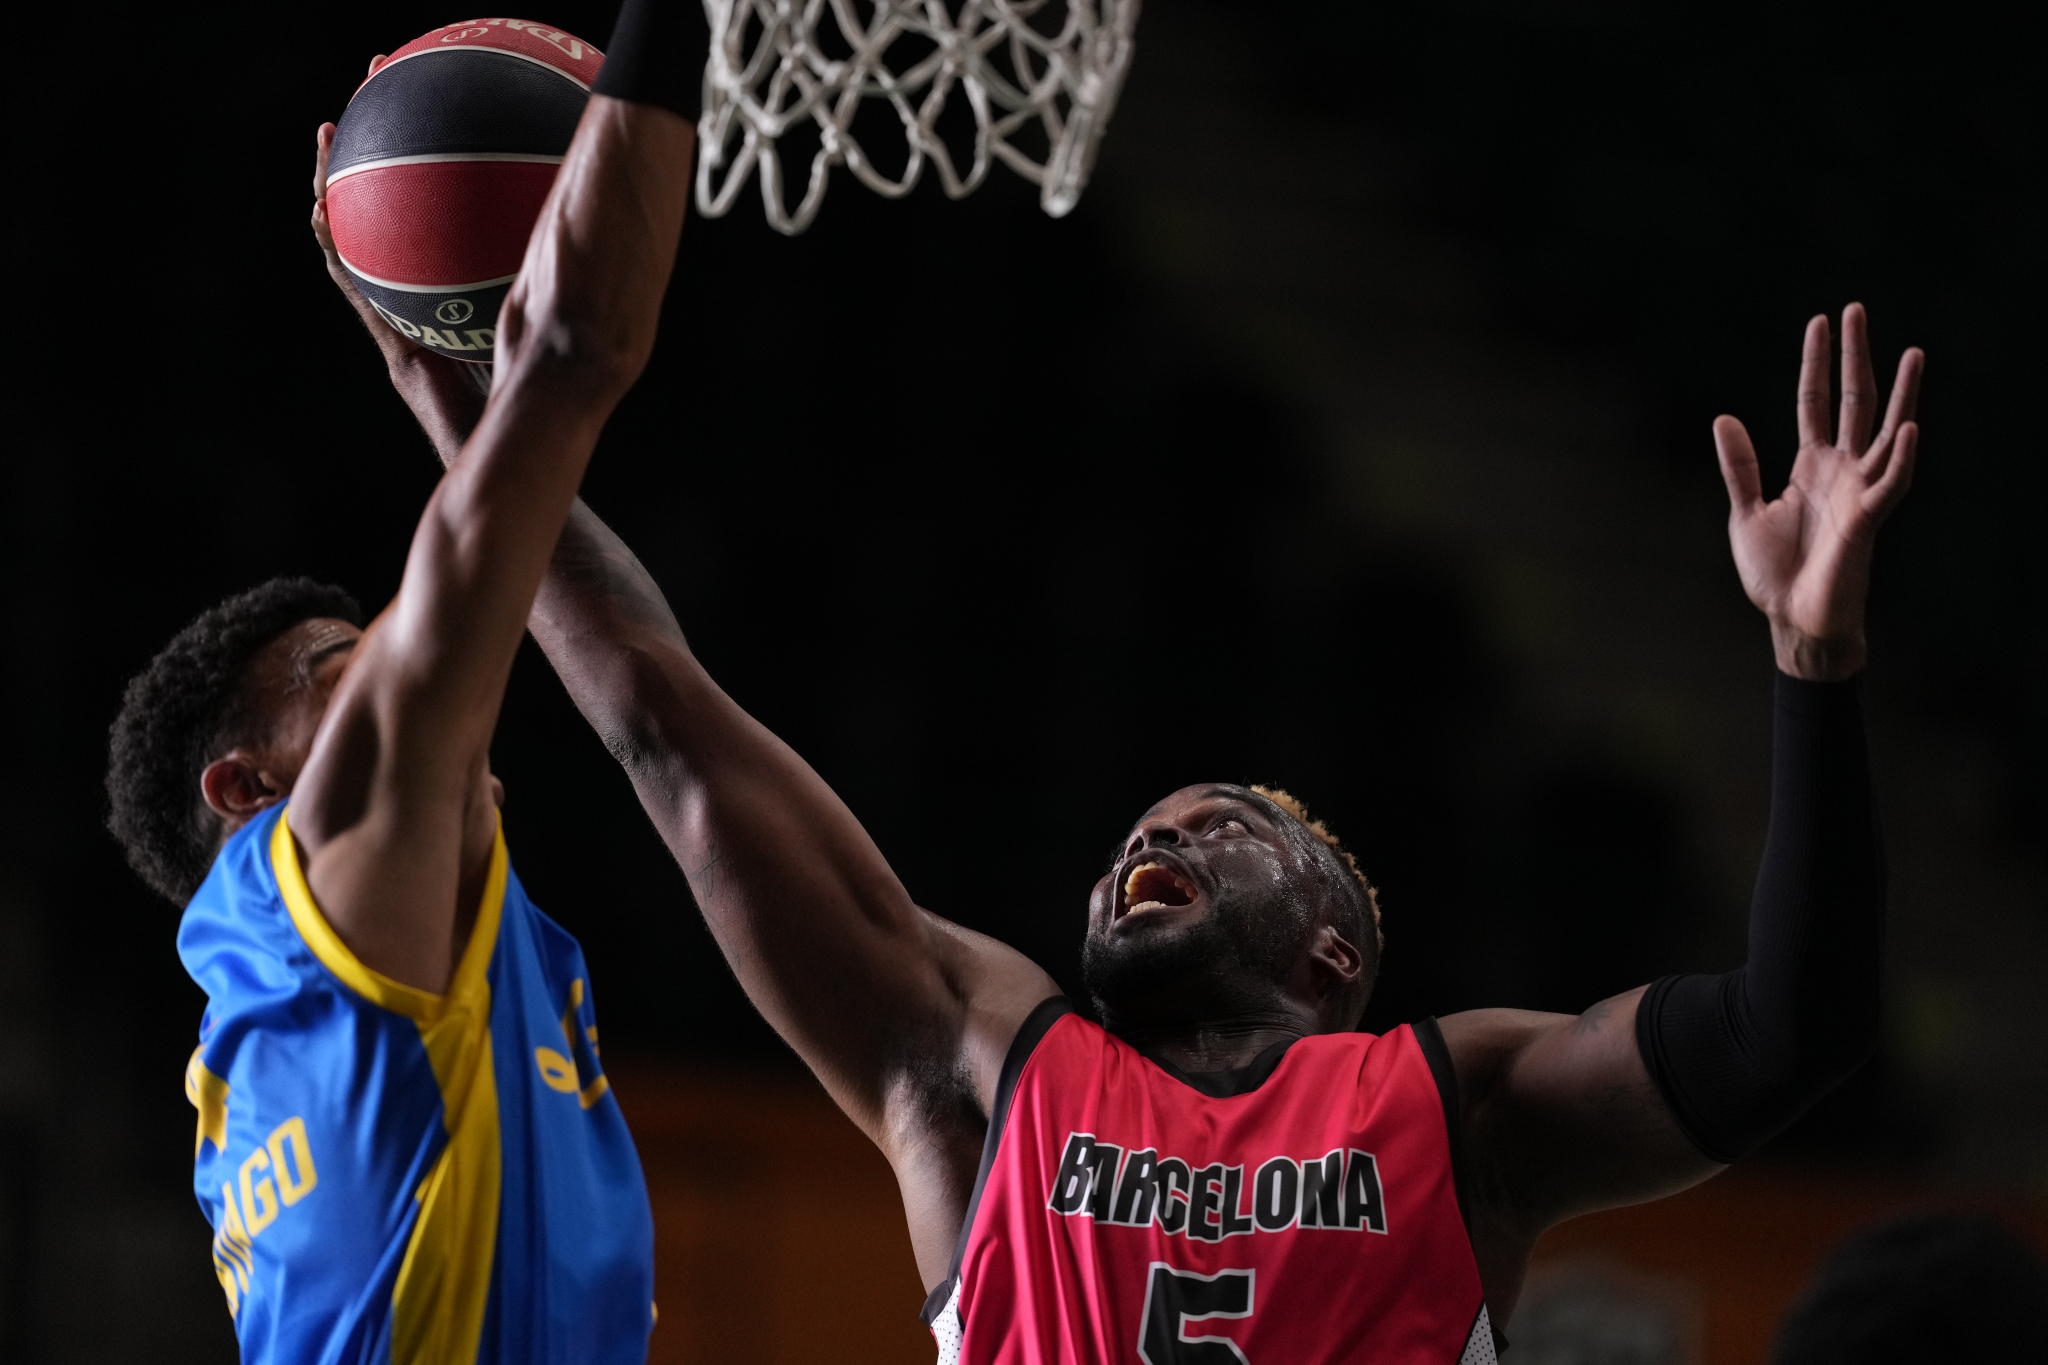 A basketball player tries to score a goal as another player defends